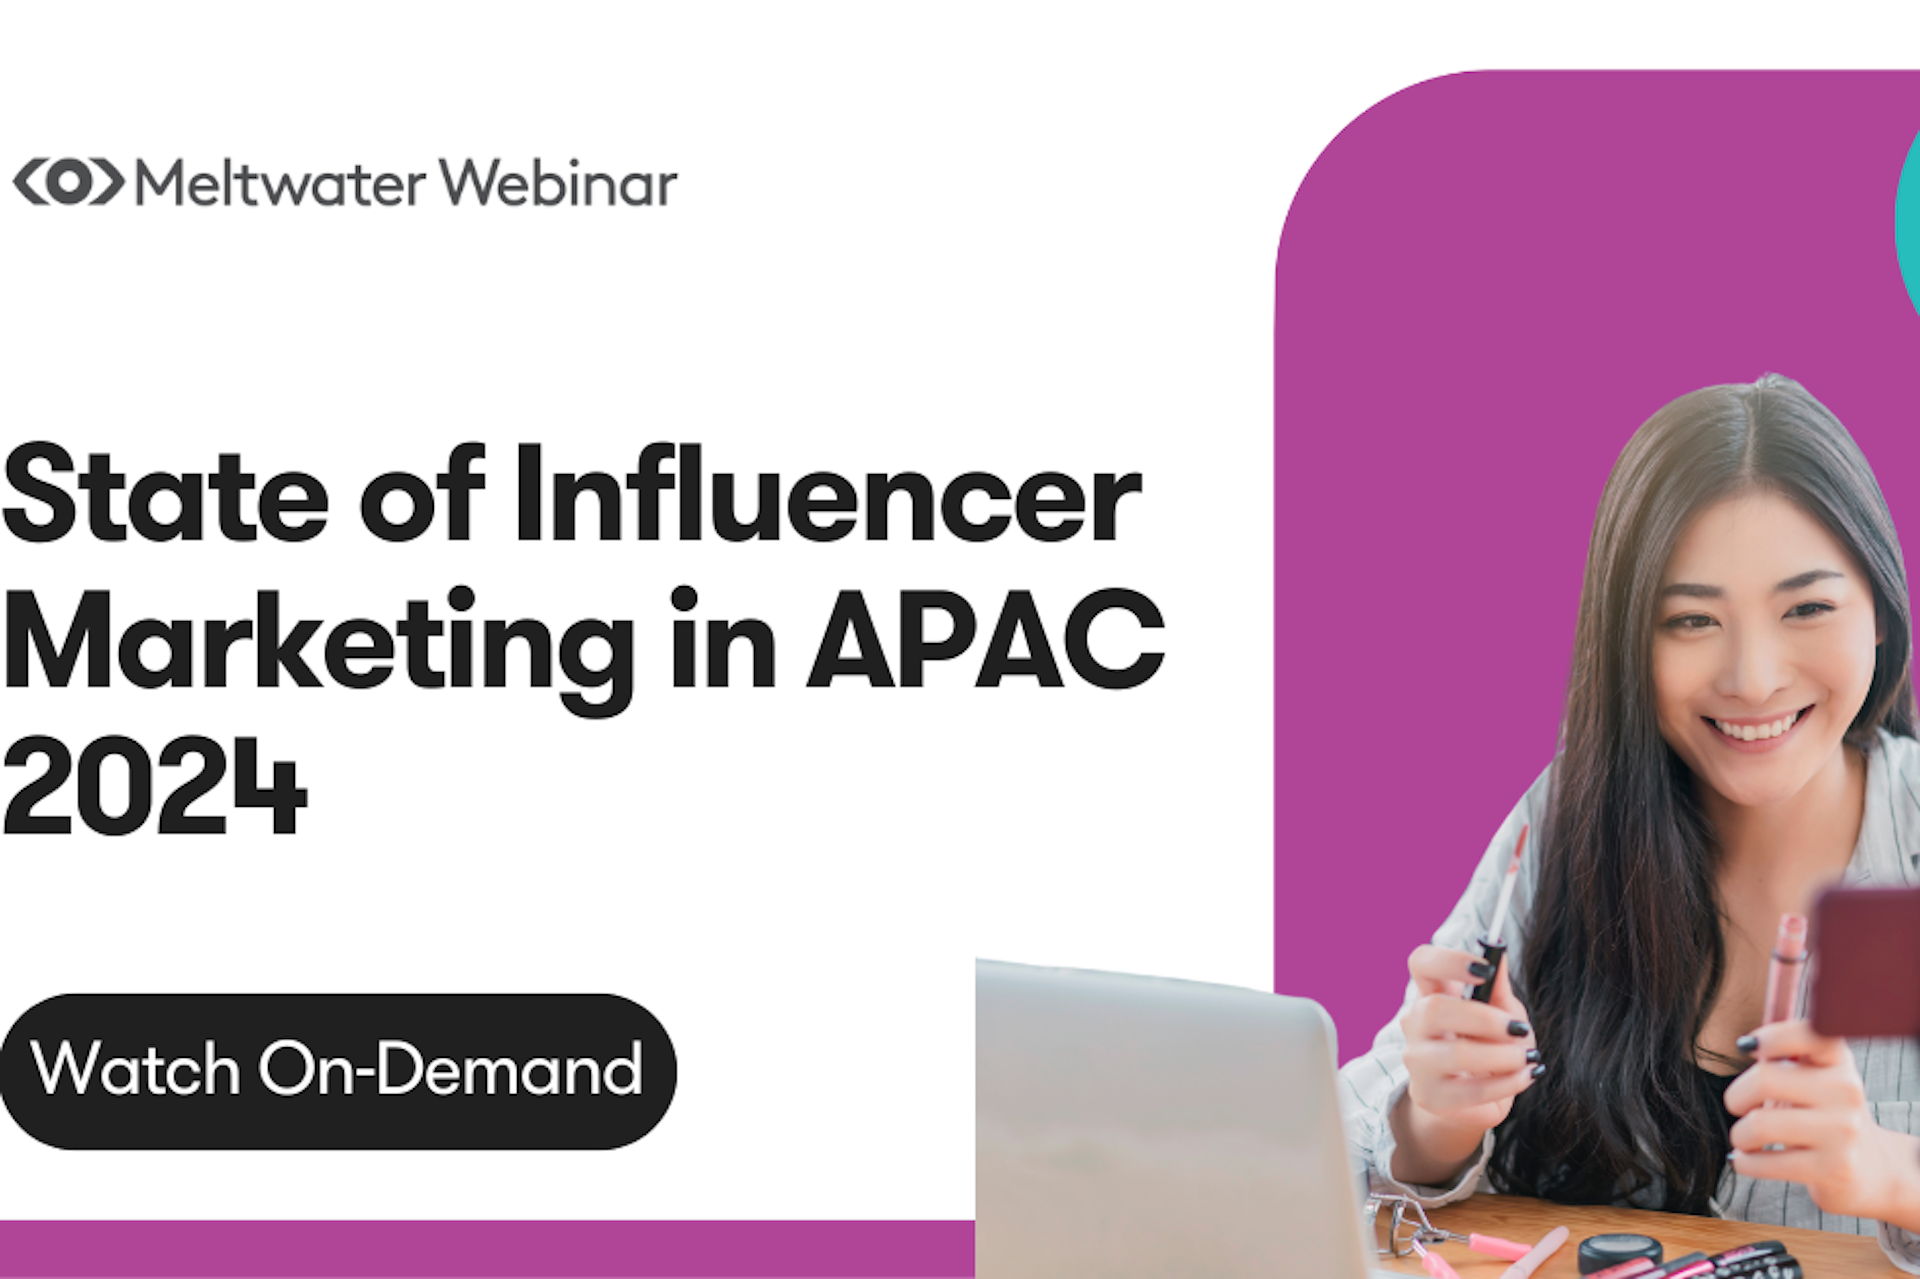 This is the promotional graphic for the State of Influencer Marketing in APAC 2024.